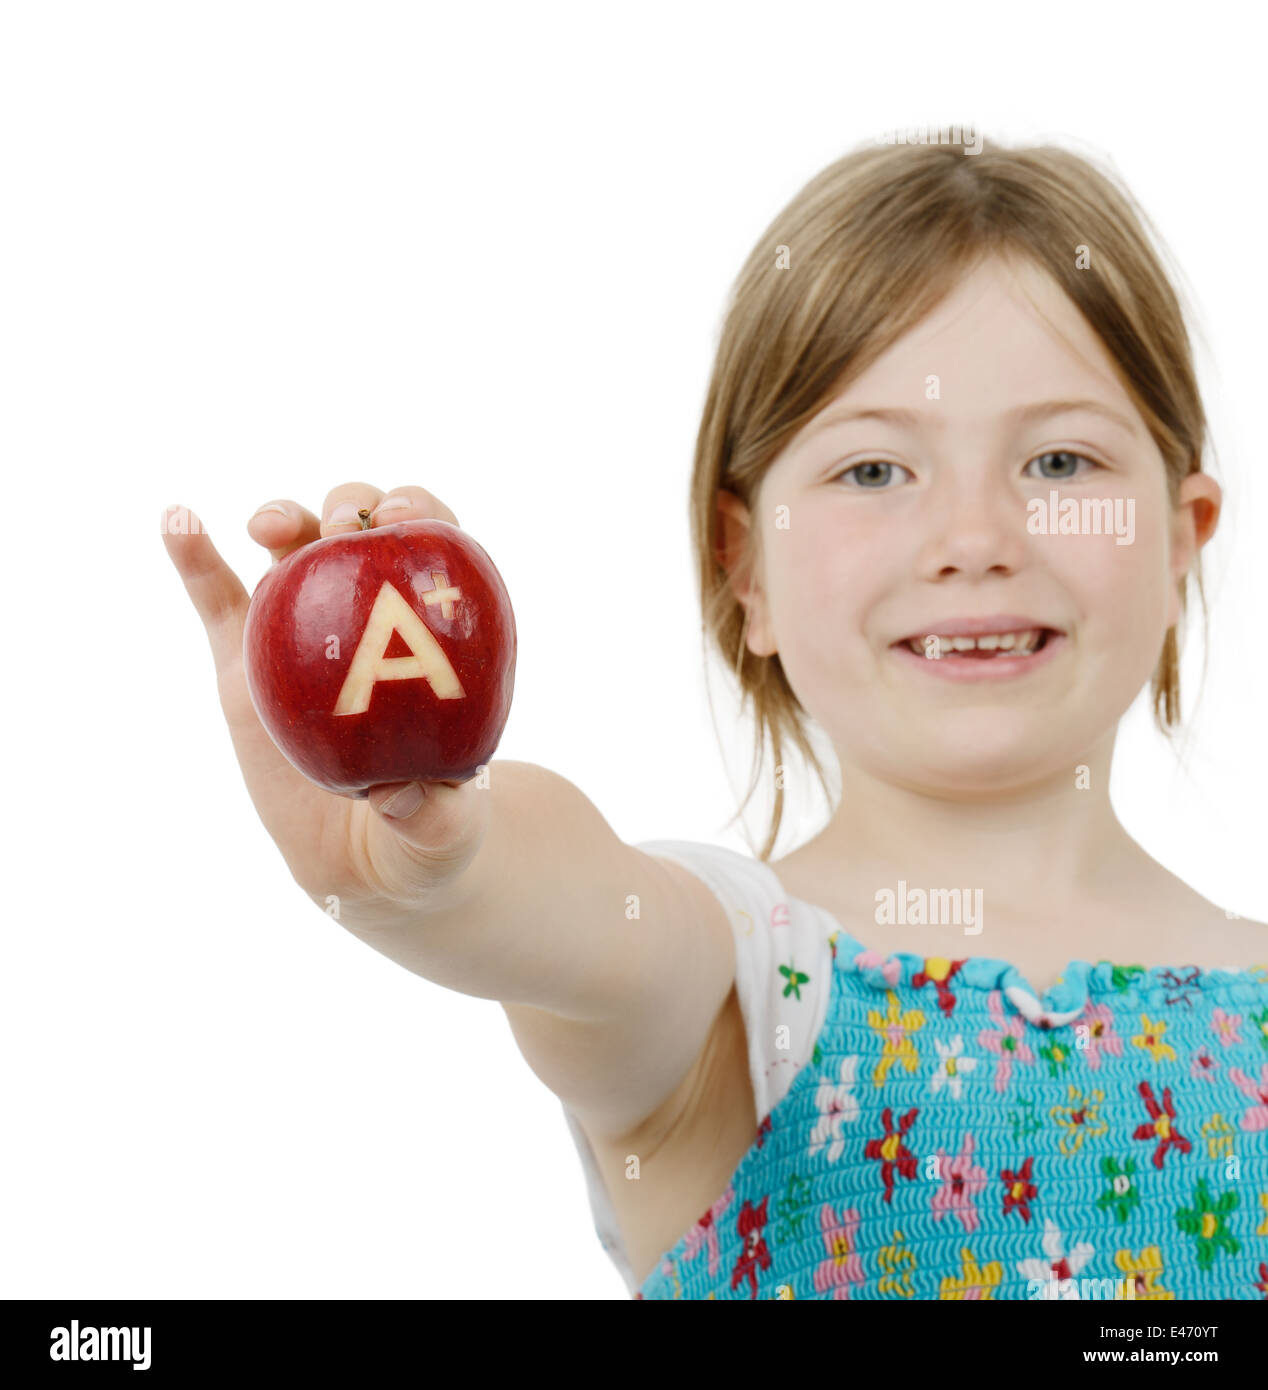 school girl with top marks an a plus symbol on a red apple, isolated on a white background Stock Photo